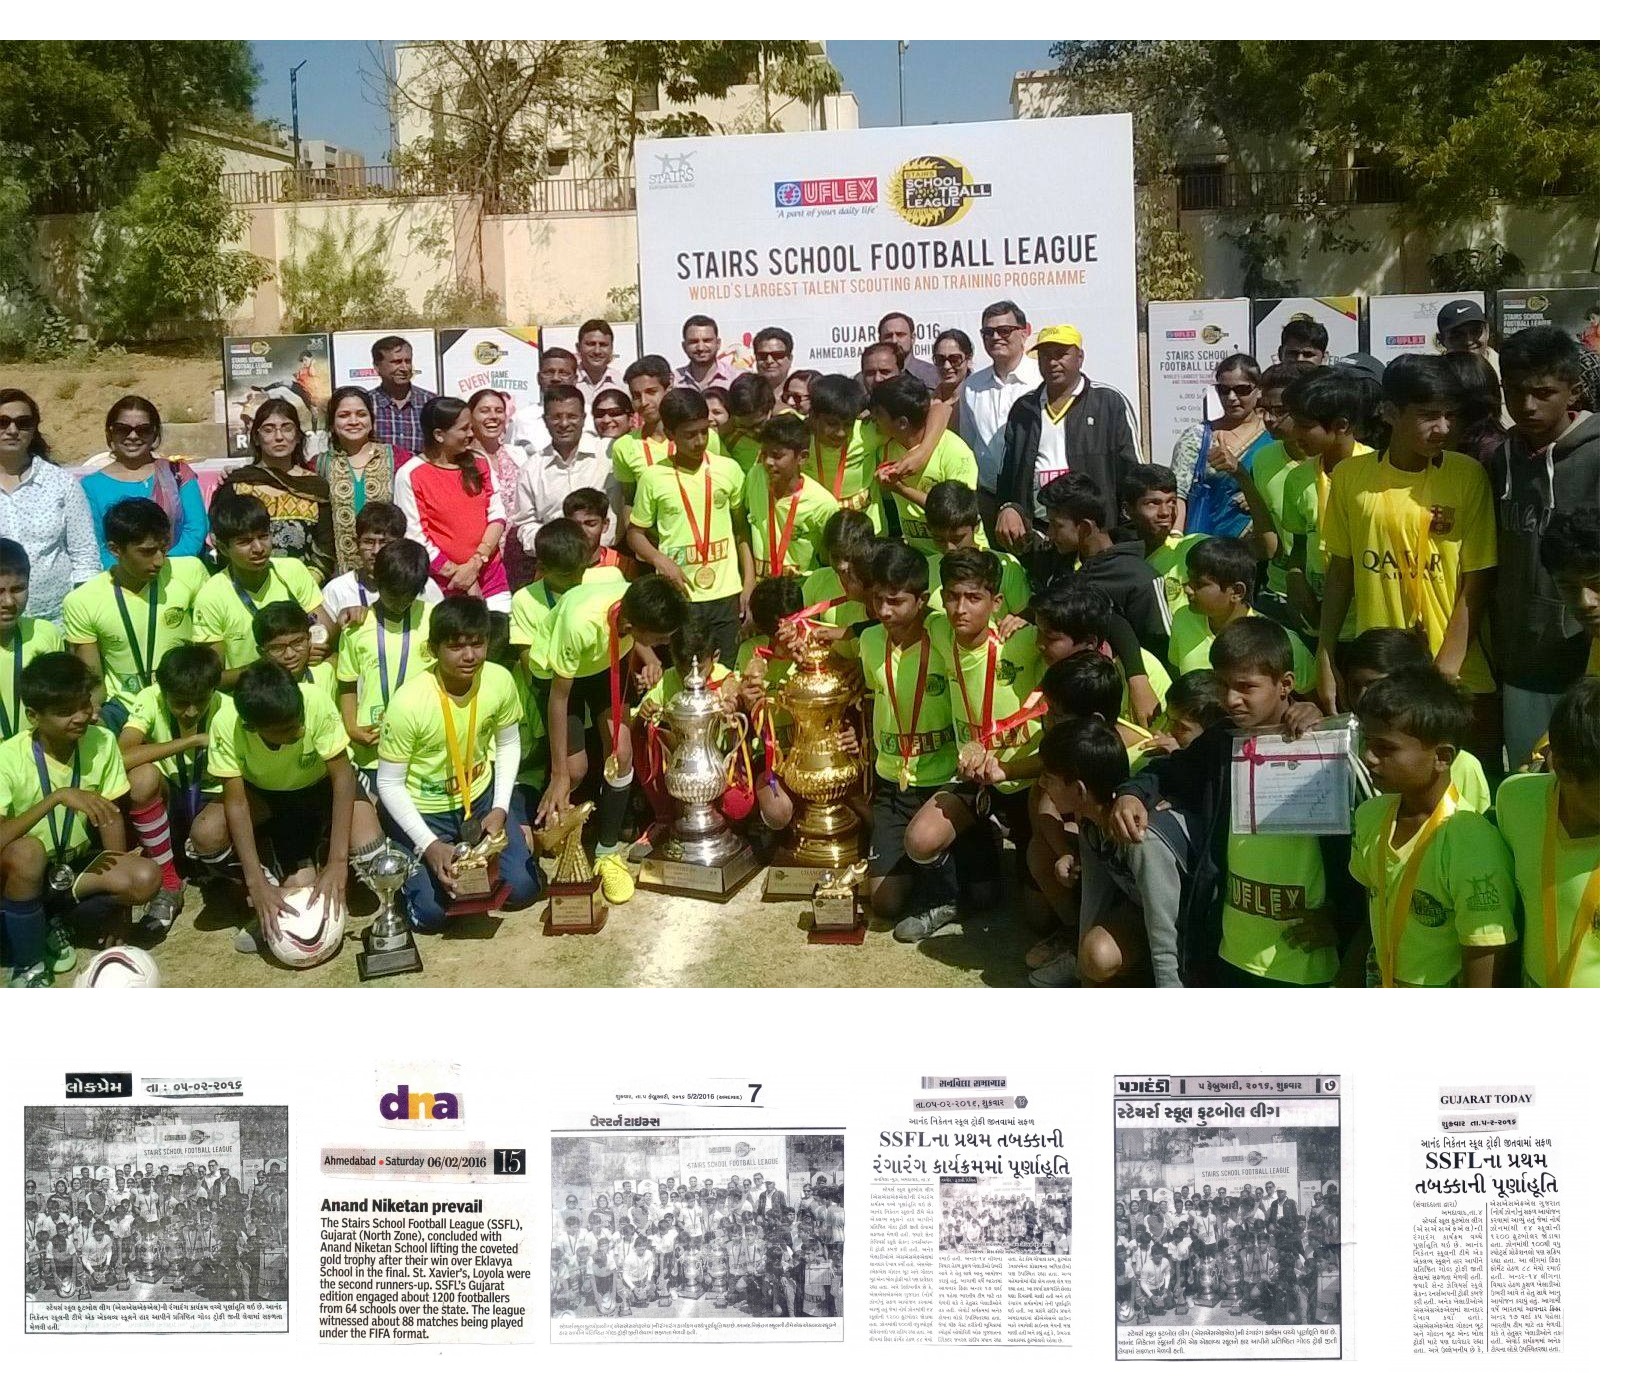 First Phase Of Stairs School Football League, Gujarat (North Zone) Concludes